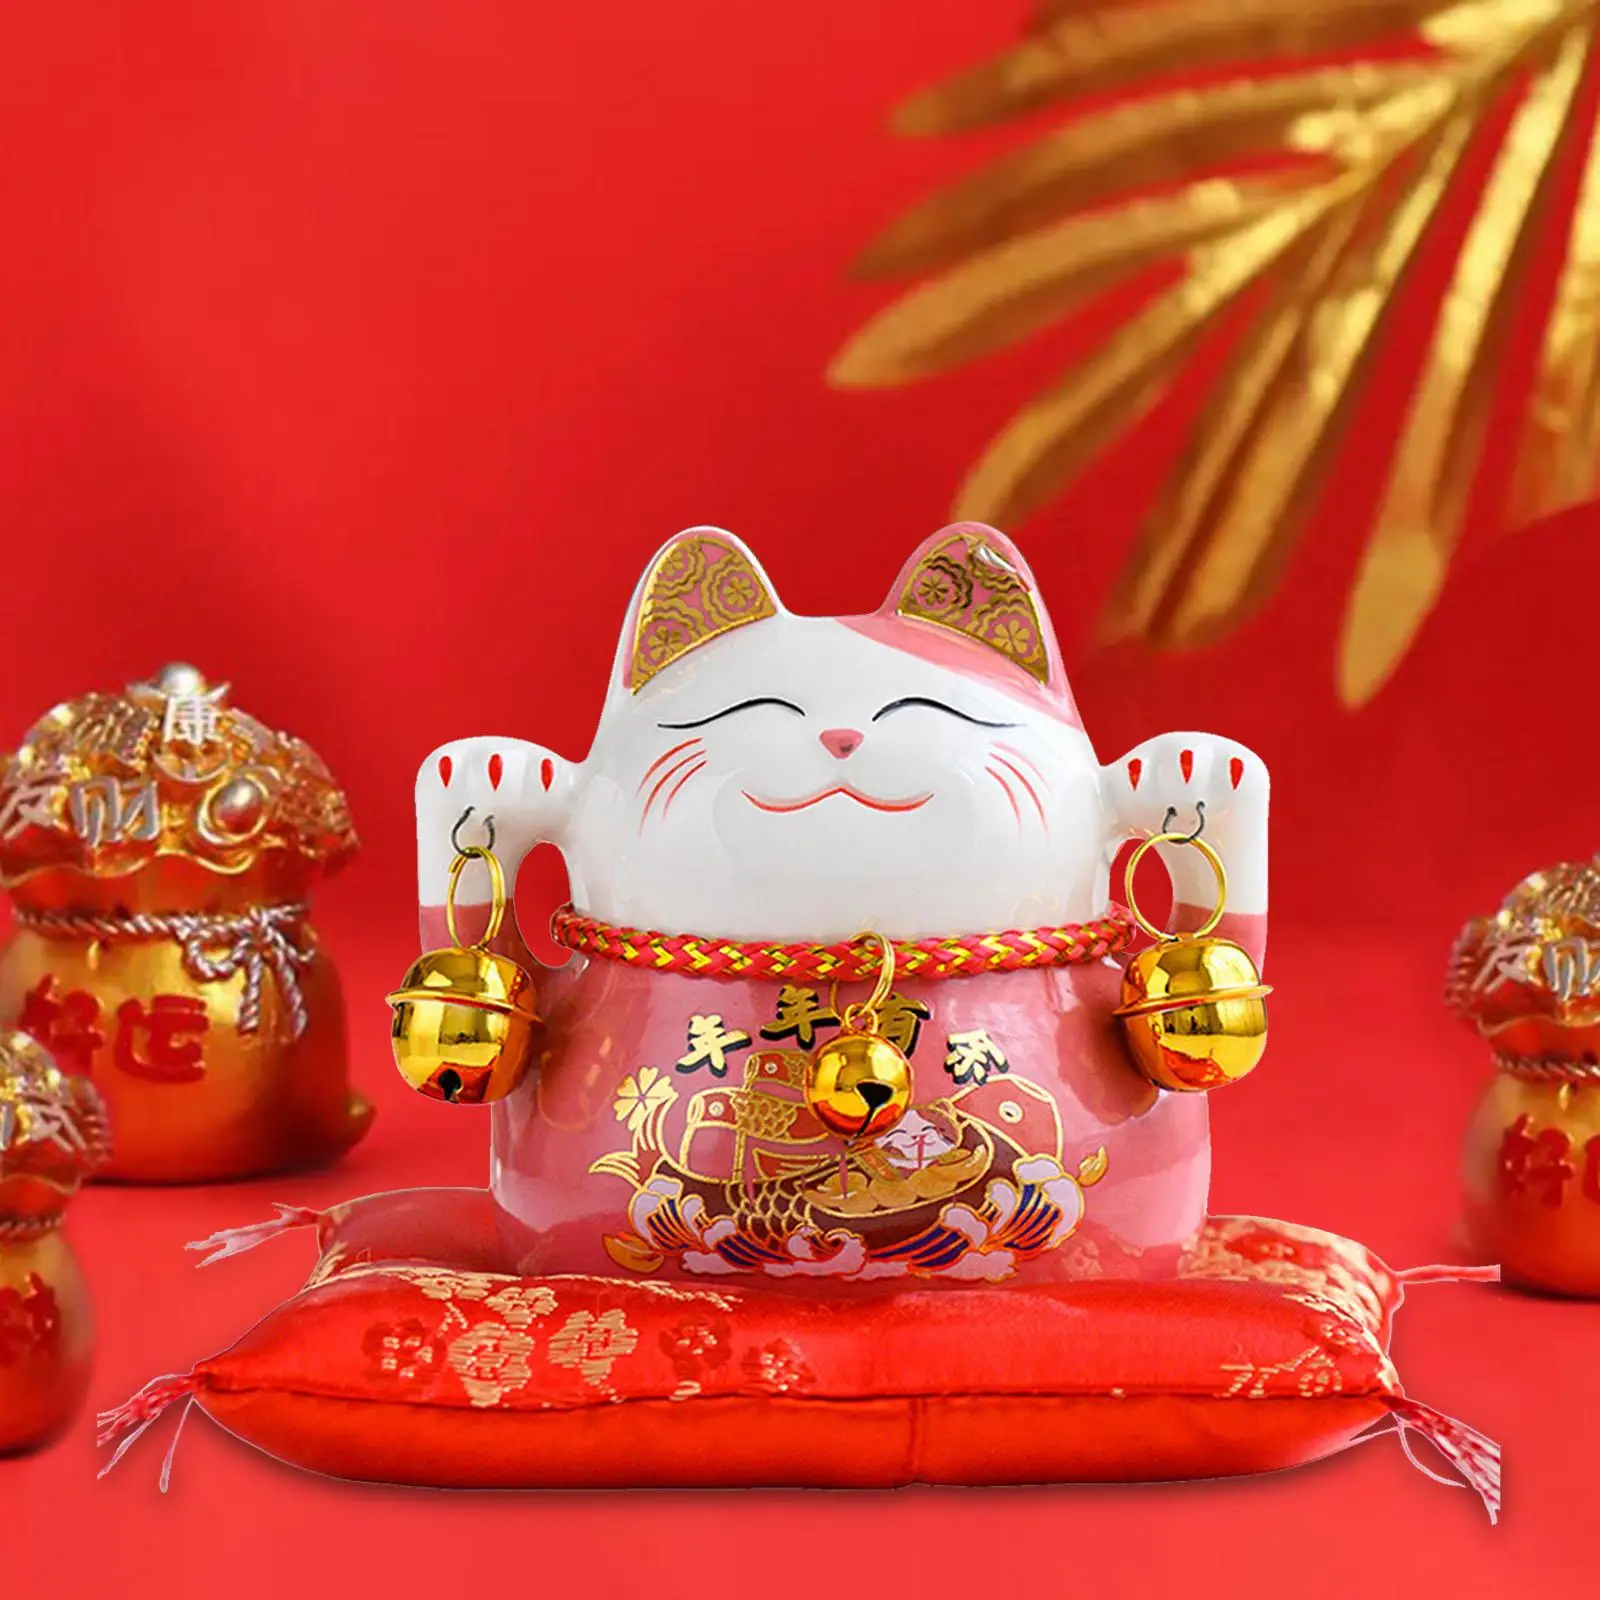 Chinese Style Lucky Cat Money Bank Saving Box Animal Figurine Decorative Kitten Statue for Desk Office Decor Dining Room Gift